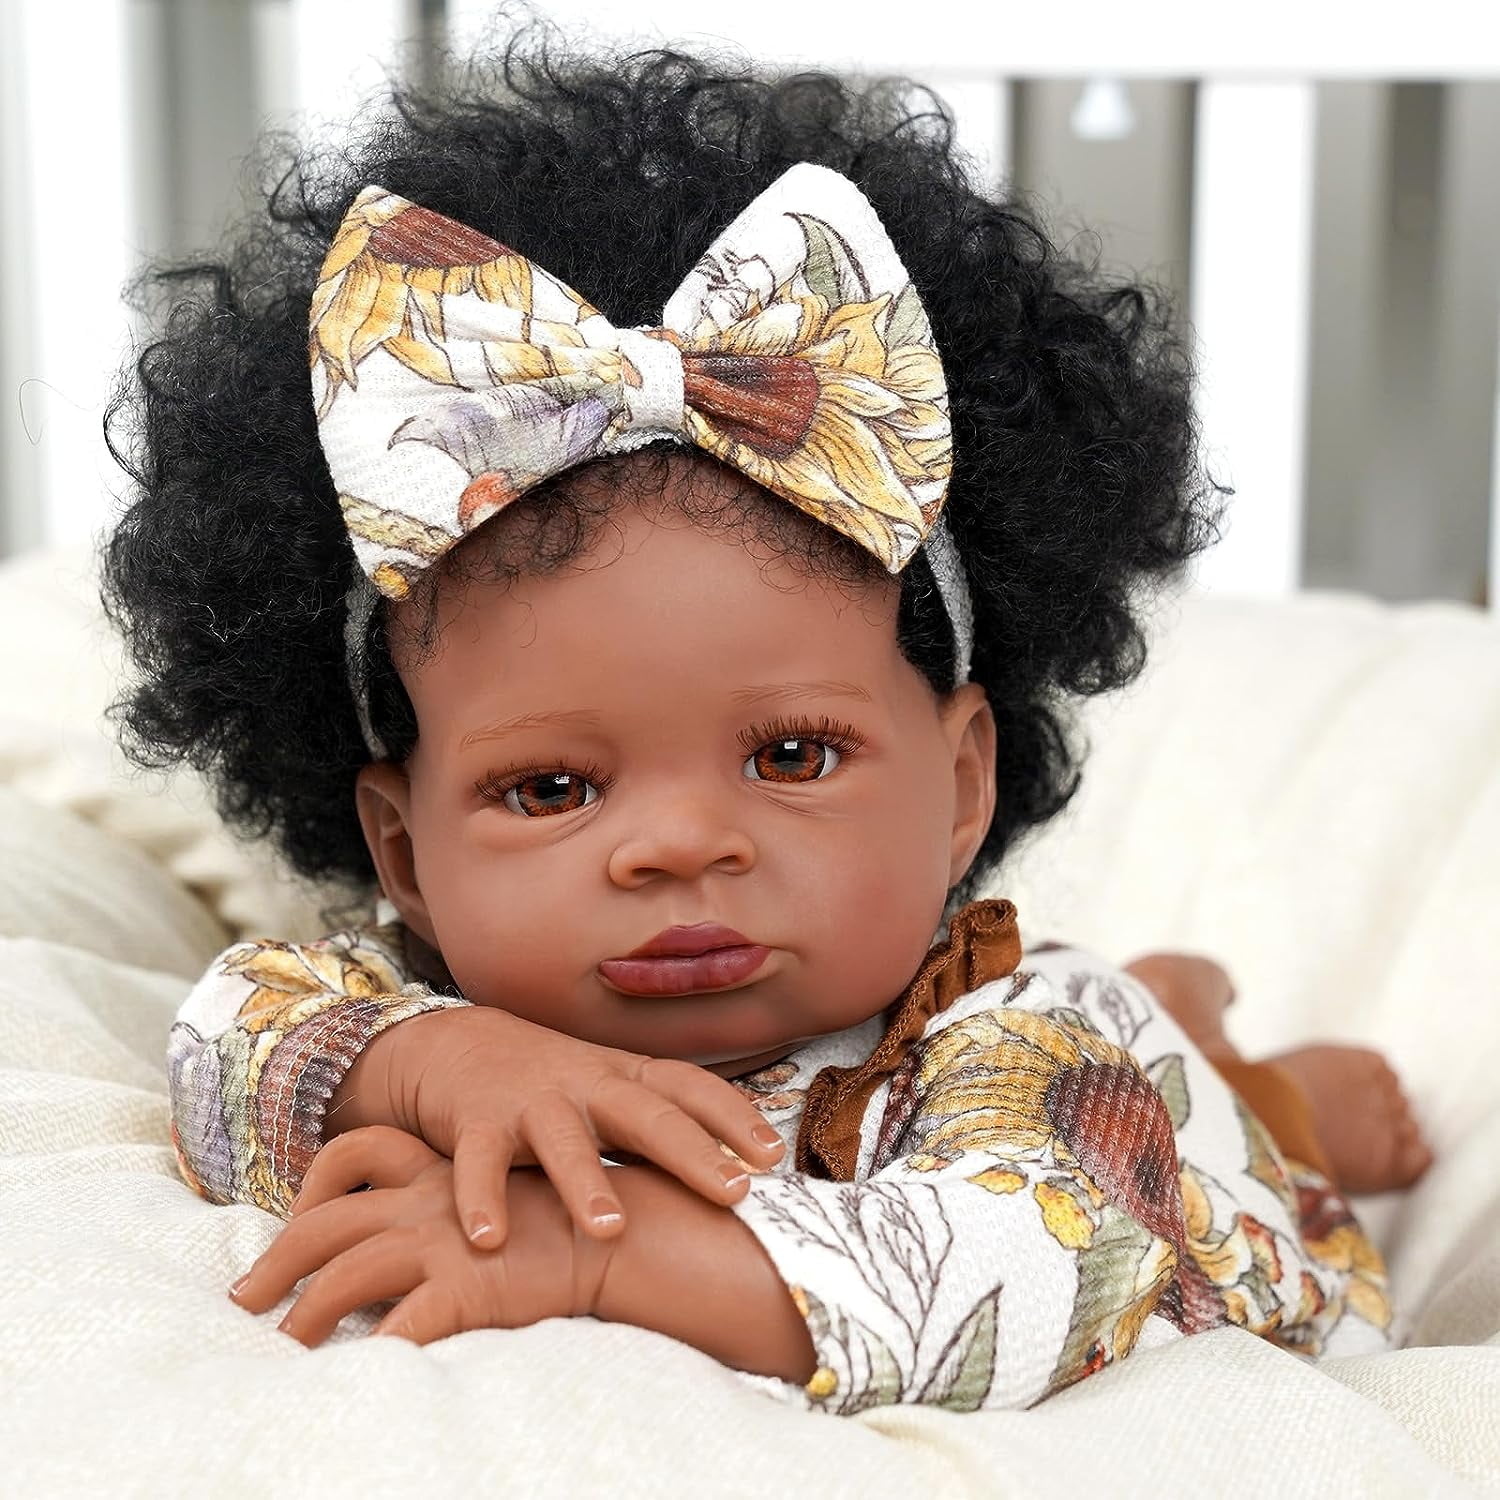 The Micro Collection - 8 Lifelike Black and Ethnic Reborn Baby